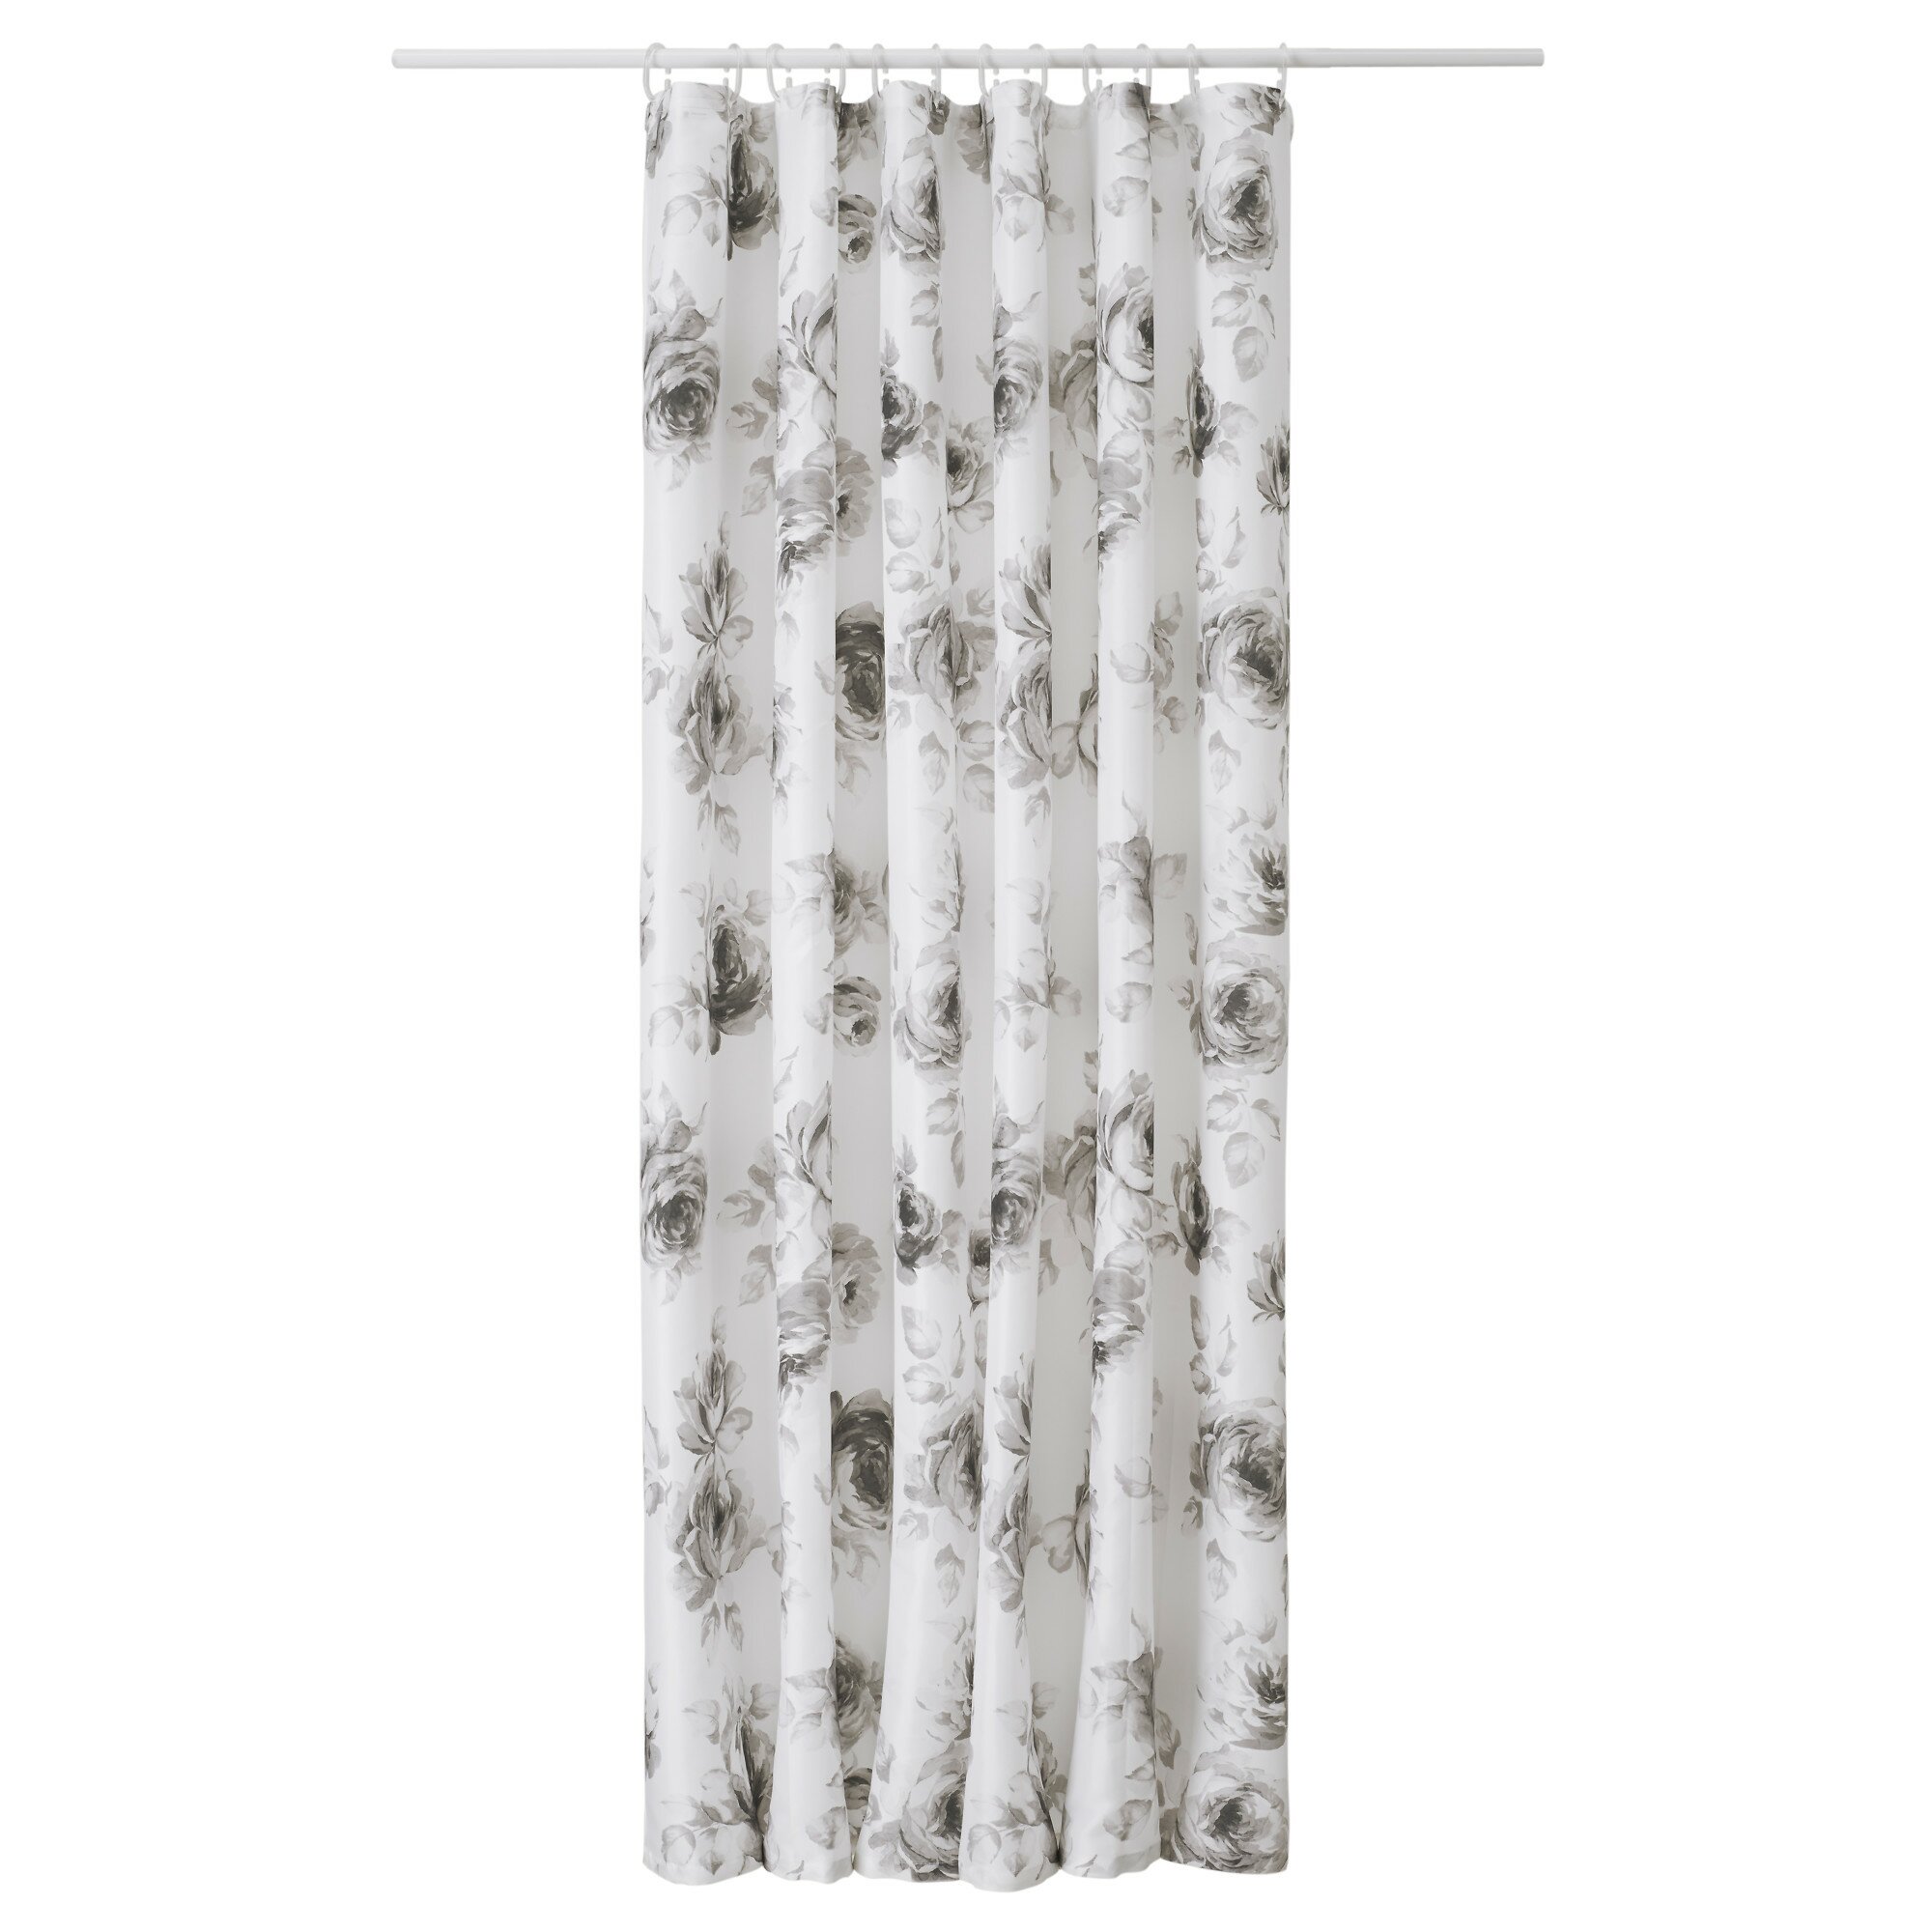 Ikea Shower Curtain for Best Your Bathroom Decoration: Single Stall Shower Curtain | Transparent Shower Curtain | Ikea Shower Curtain